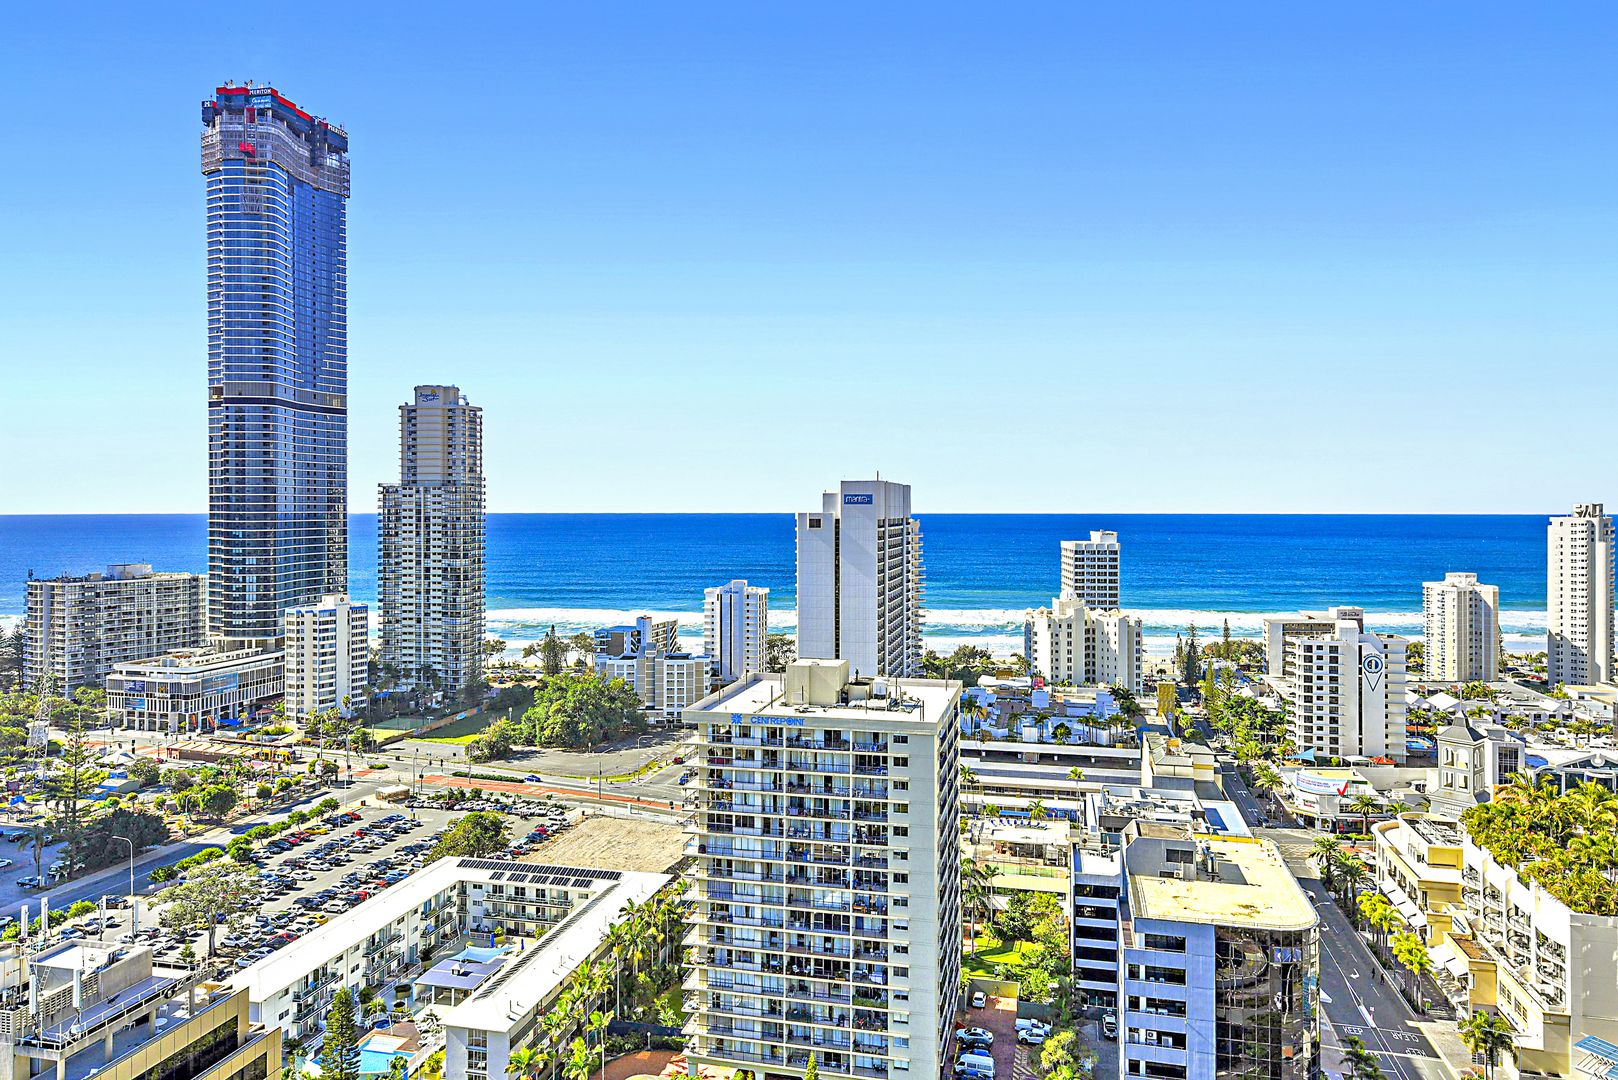 Sold 26C/2 Riverview Parade, Surfers Paradise QLD 4217 on 25 Aug 2021